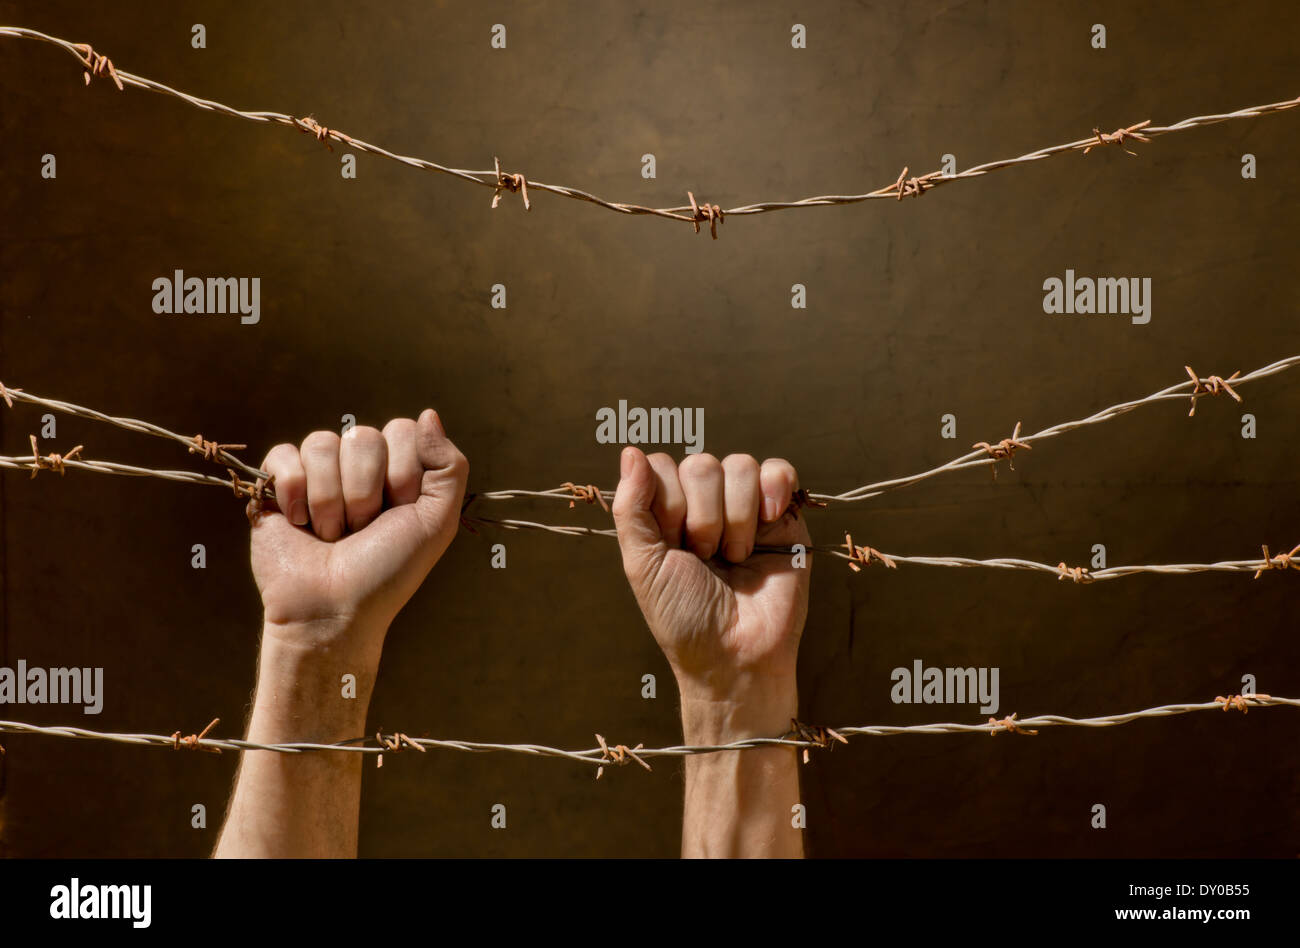 hand behind barbed wire with dark background Stock Photo